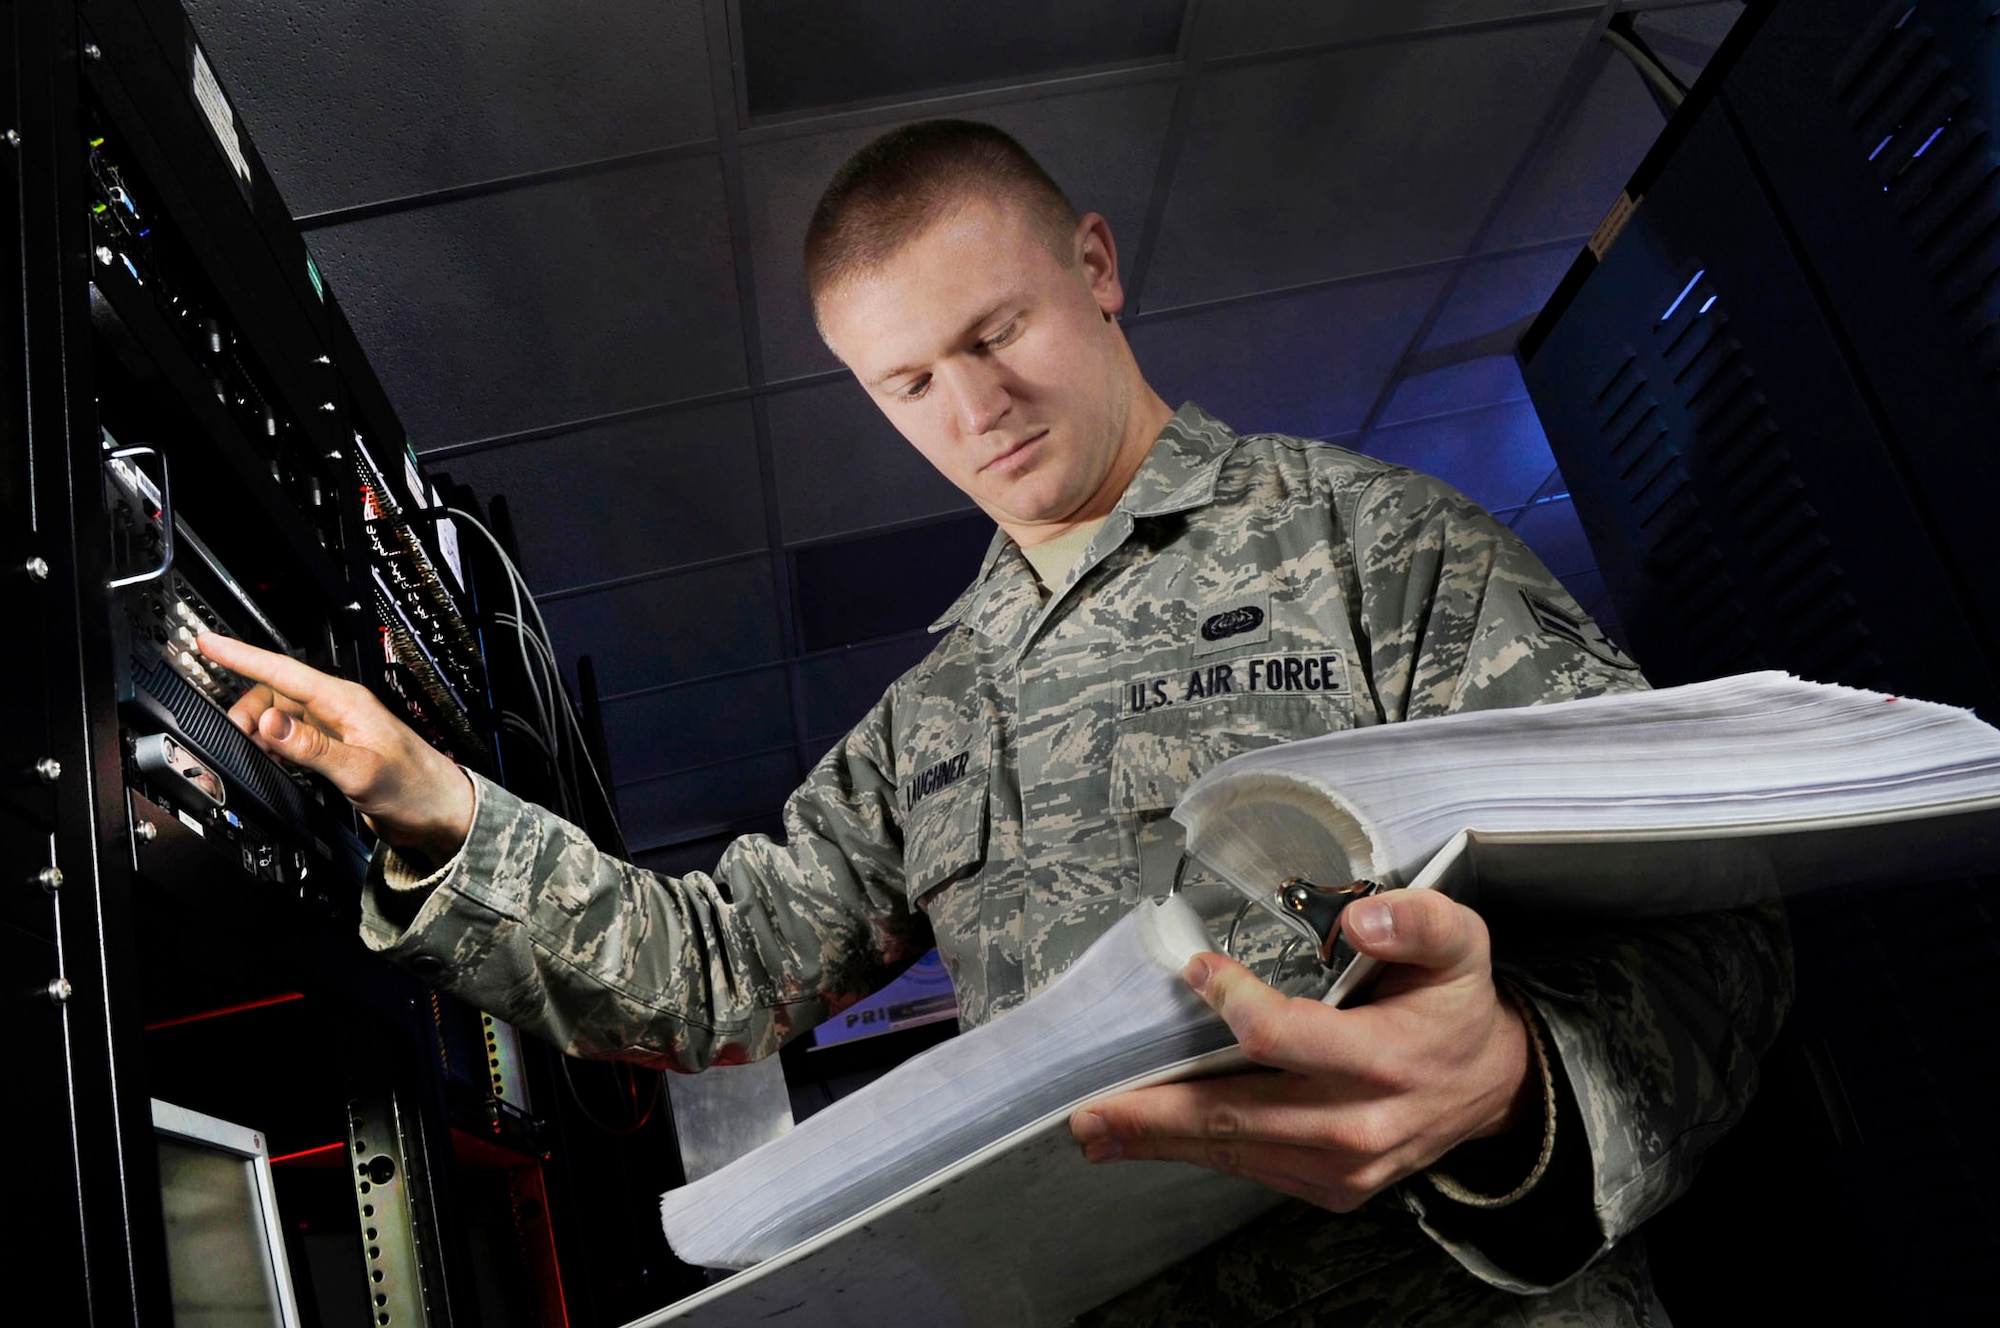 Airman 1st Class Matt Laughner performs vulnerability scans on a network system at Joint Base Andrews, Md.  Laughner is a radio frequency transmissions system technician assigned to the 89th Communications Squadron/High Frequency Global Communications System section. (U.S. Air Force photo/Val Gempis)